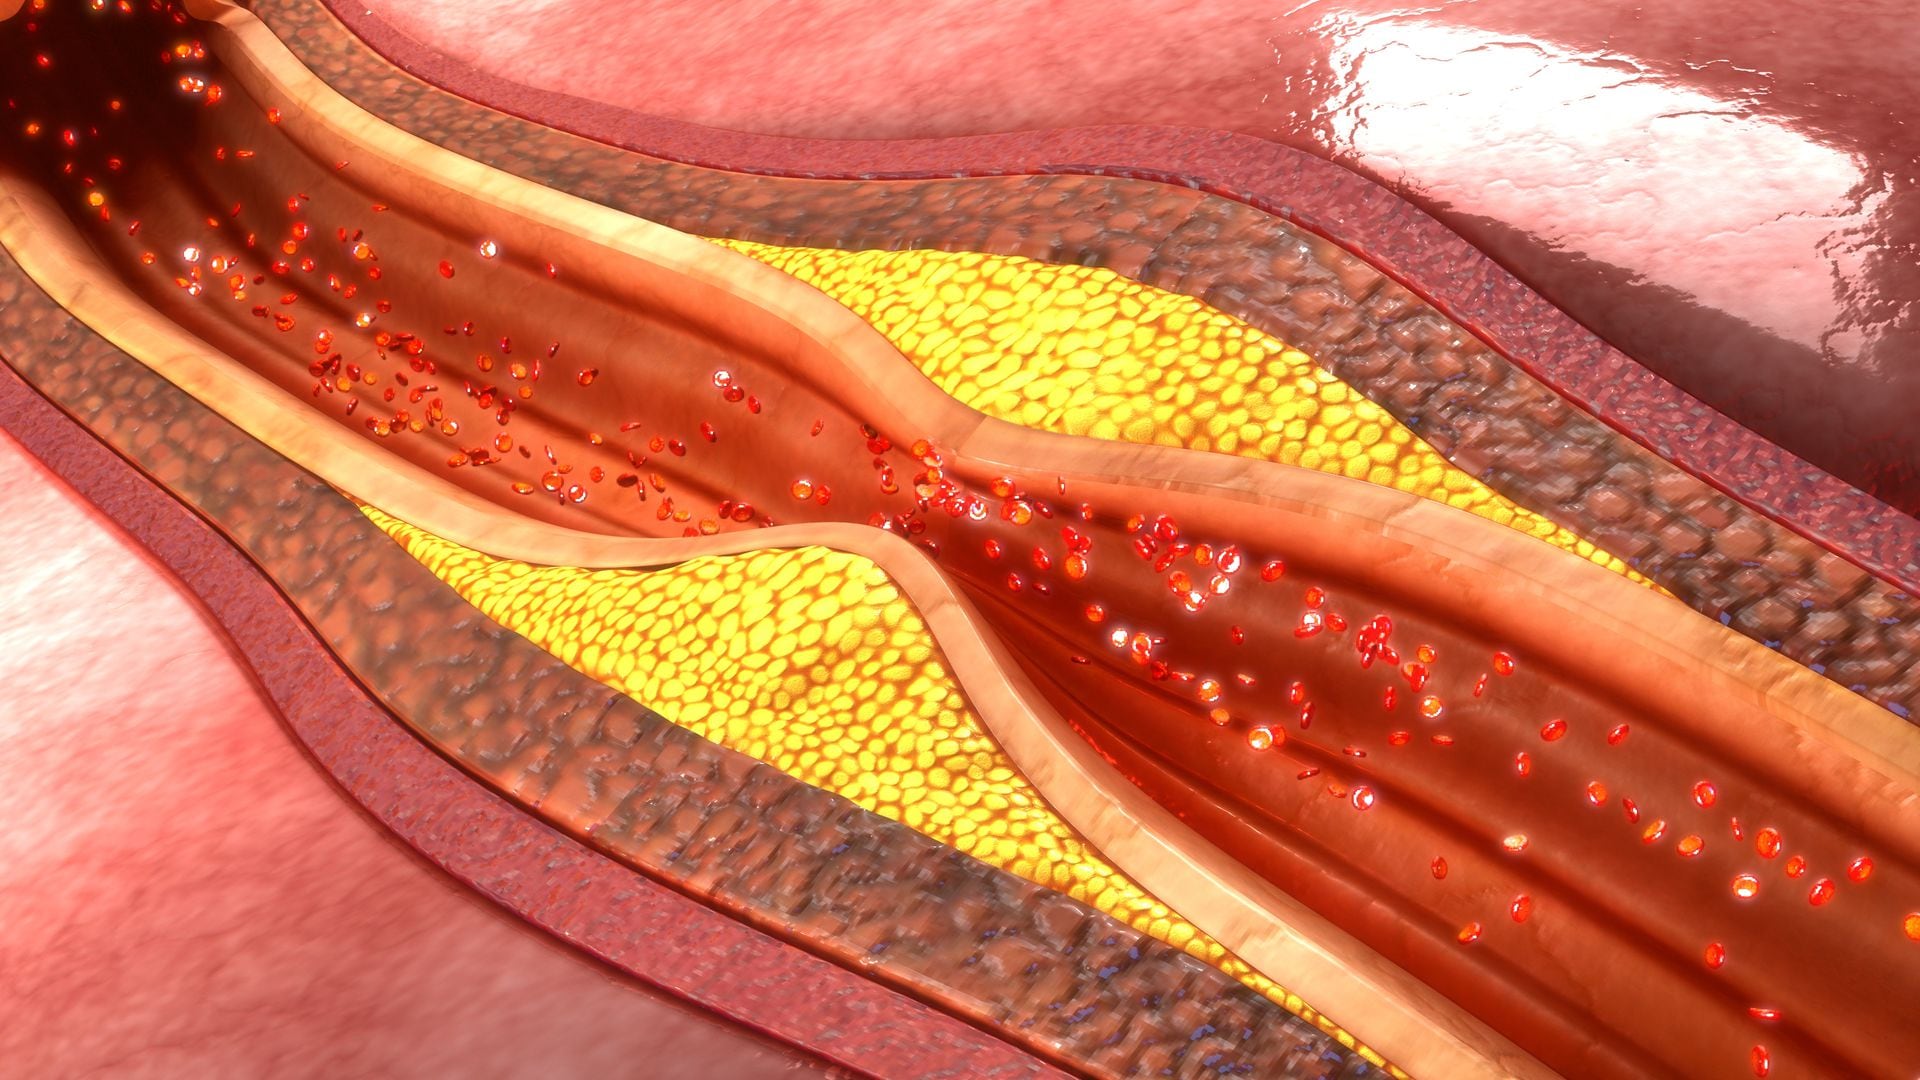 When cholesterol builds up in the arteries, the risk of heart disease increases.